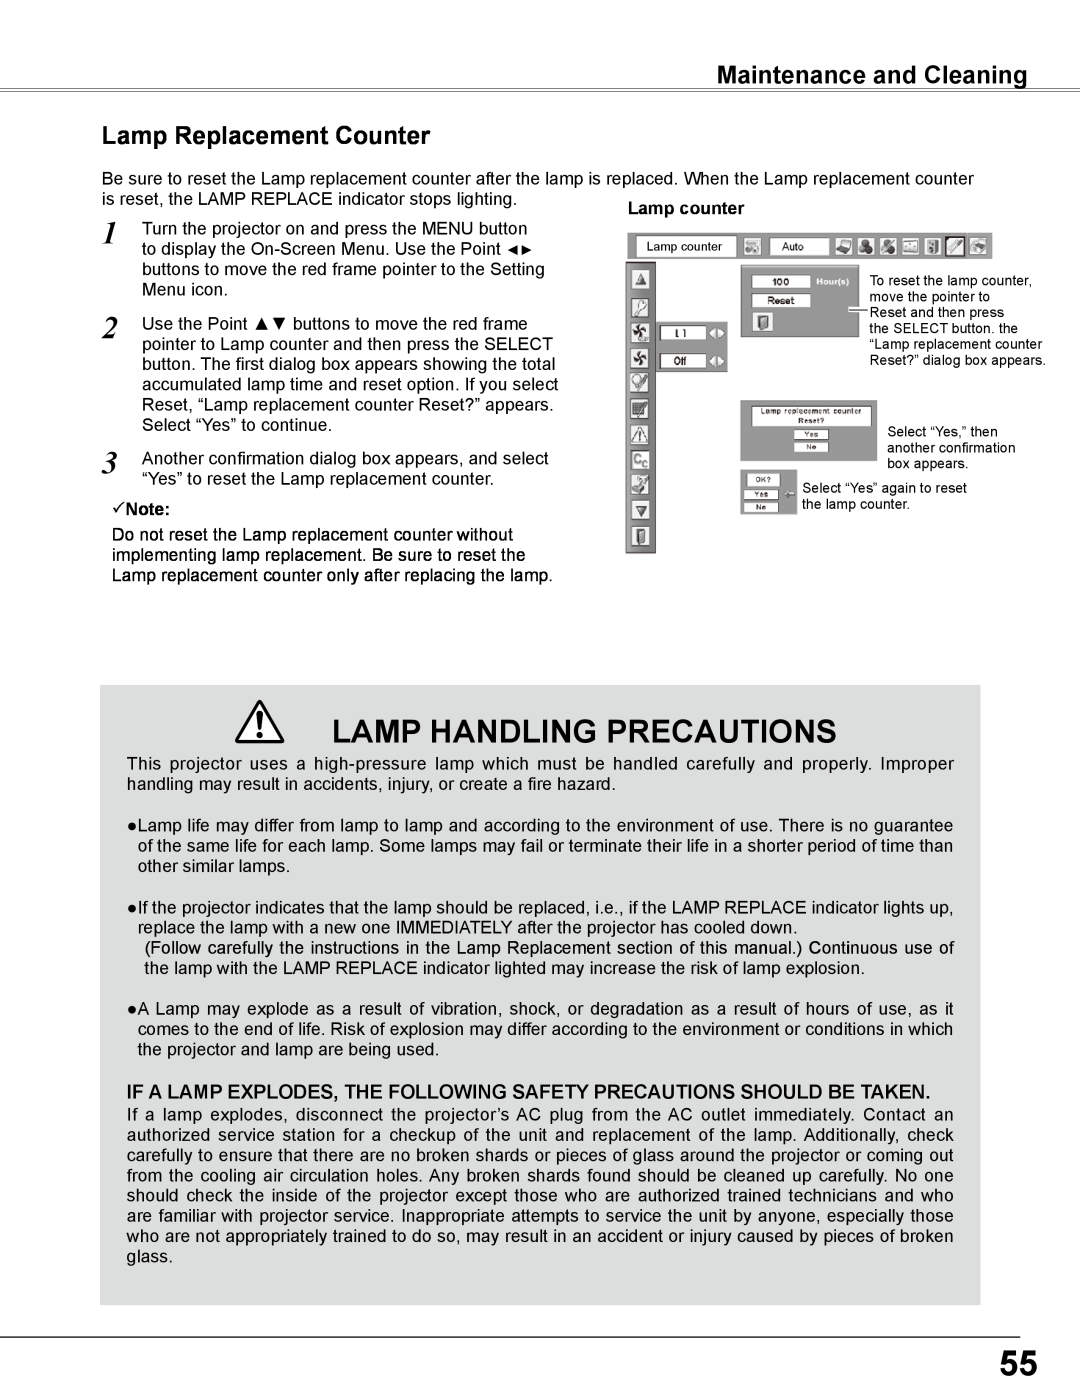 Sanyo PLC-WXE46 owner manual Maintenance and Cleaning Lamp Replacement Counter, Lamp Handling Precautions, Note 